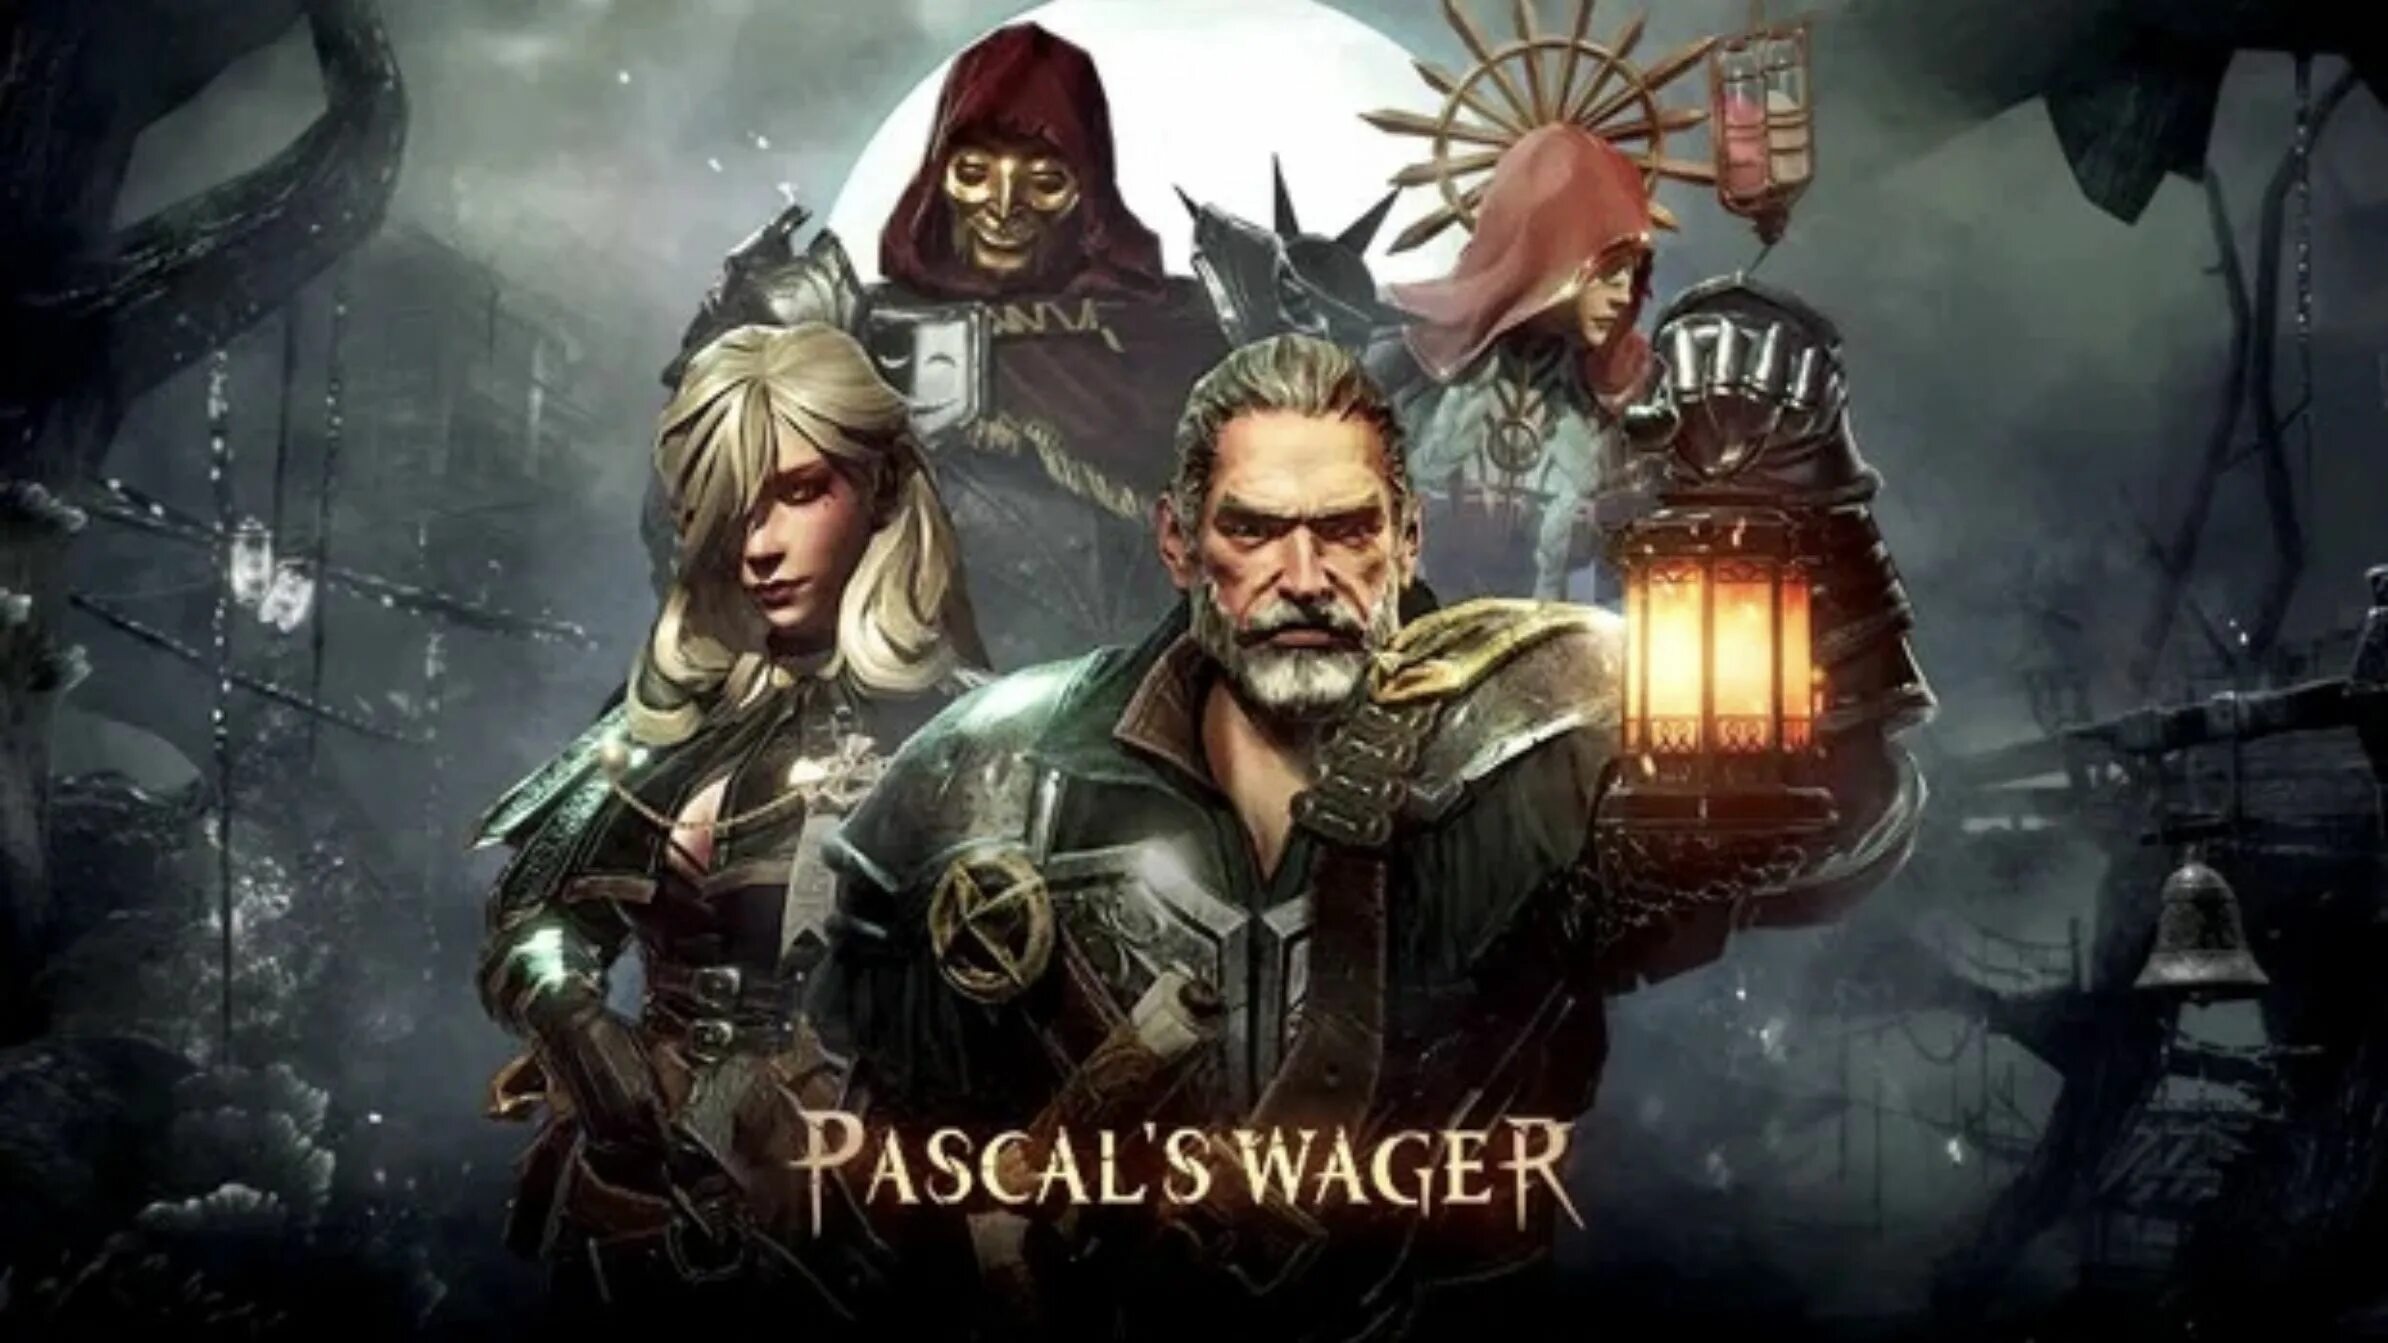 Pascal's Wager: Definitive Edition. Pascal Wager Android. Pascal's Wager на ПК. Pascal's Wager Definitive Edition Нинтендо. Pascal s wager кэш